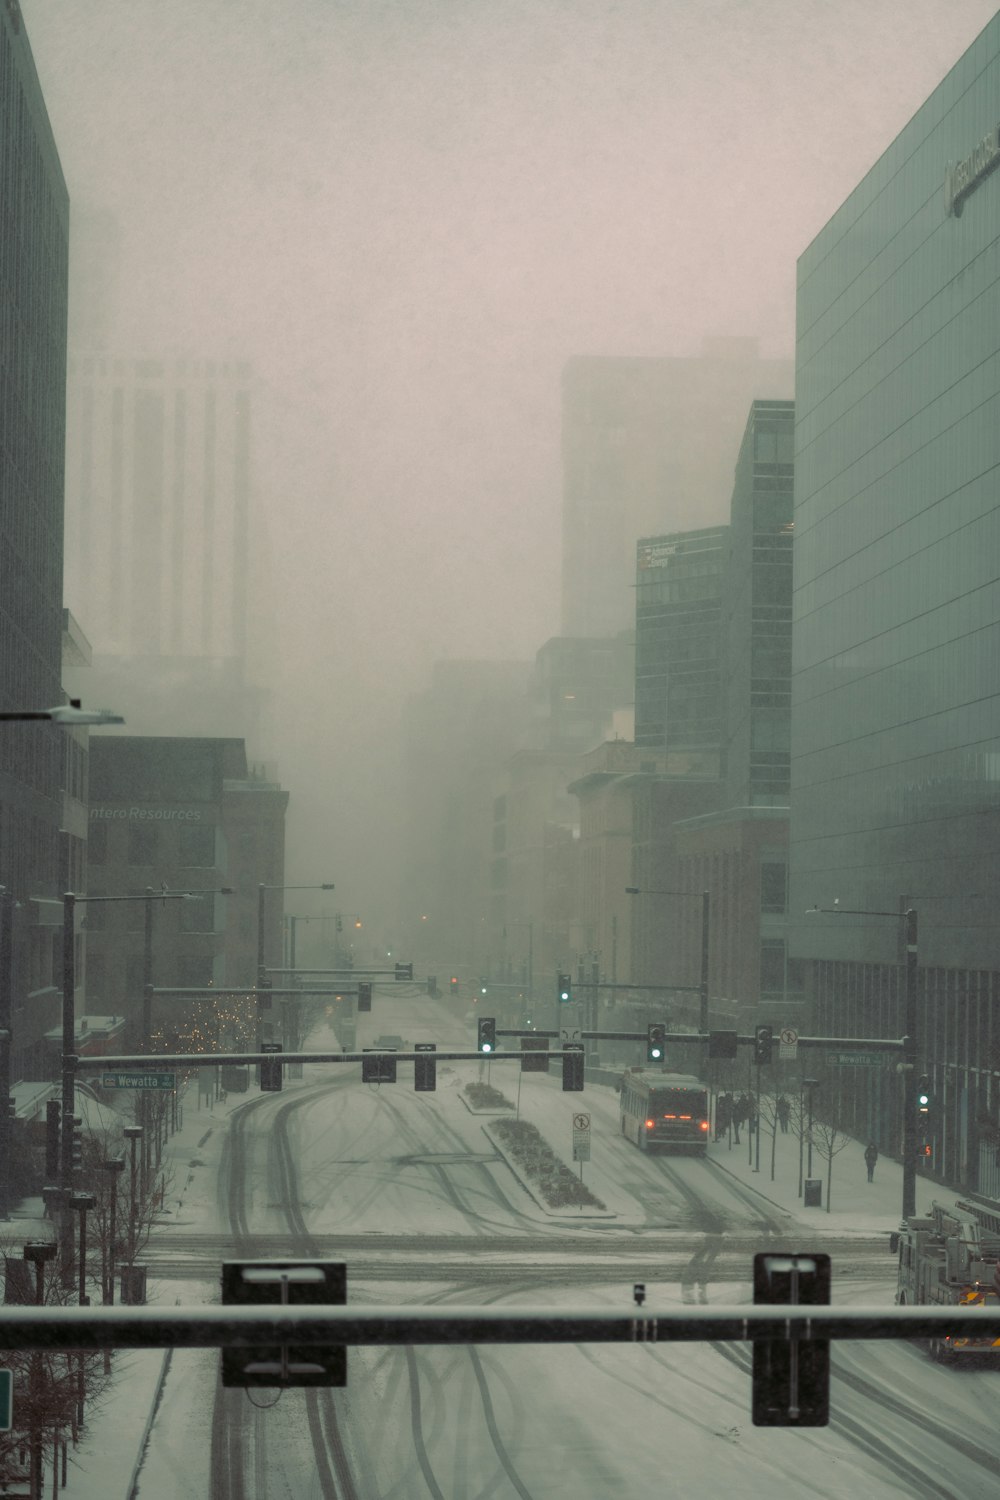 a snowy city street with traffic lights and buildings